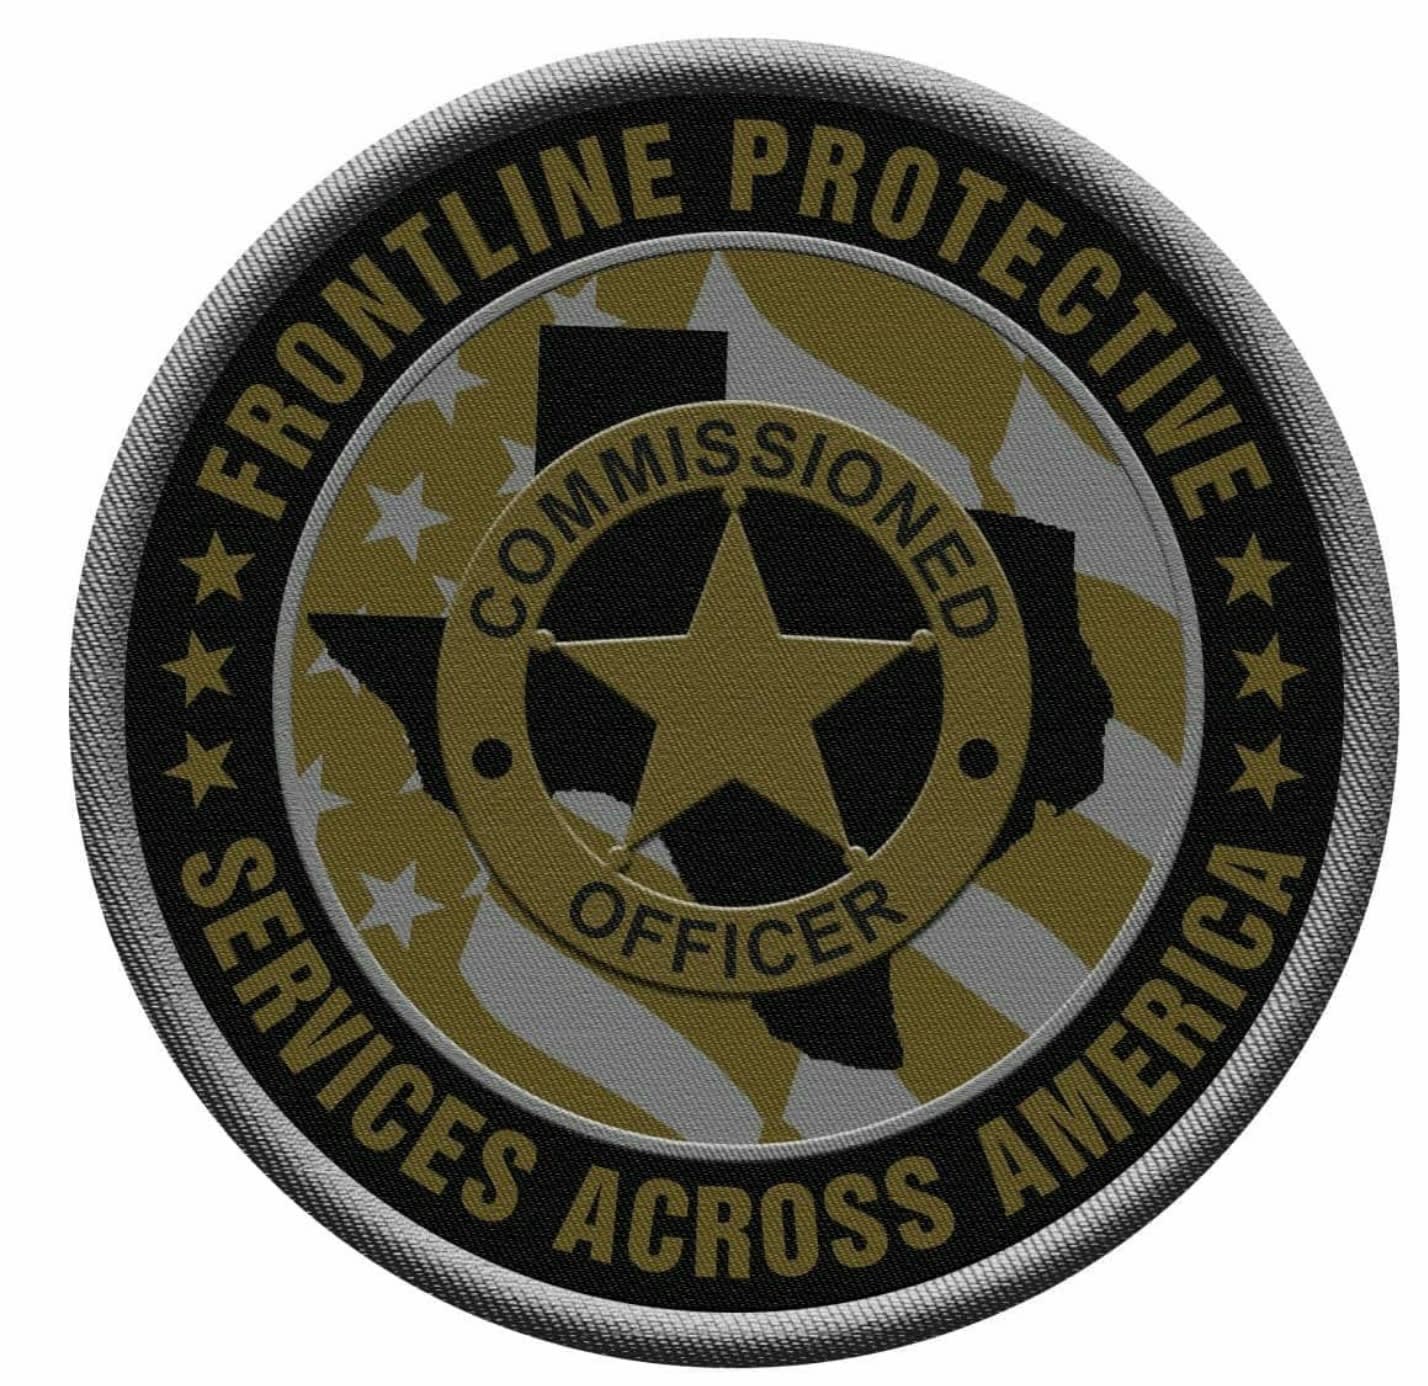 Frontline Protective Services